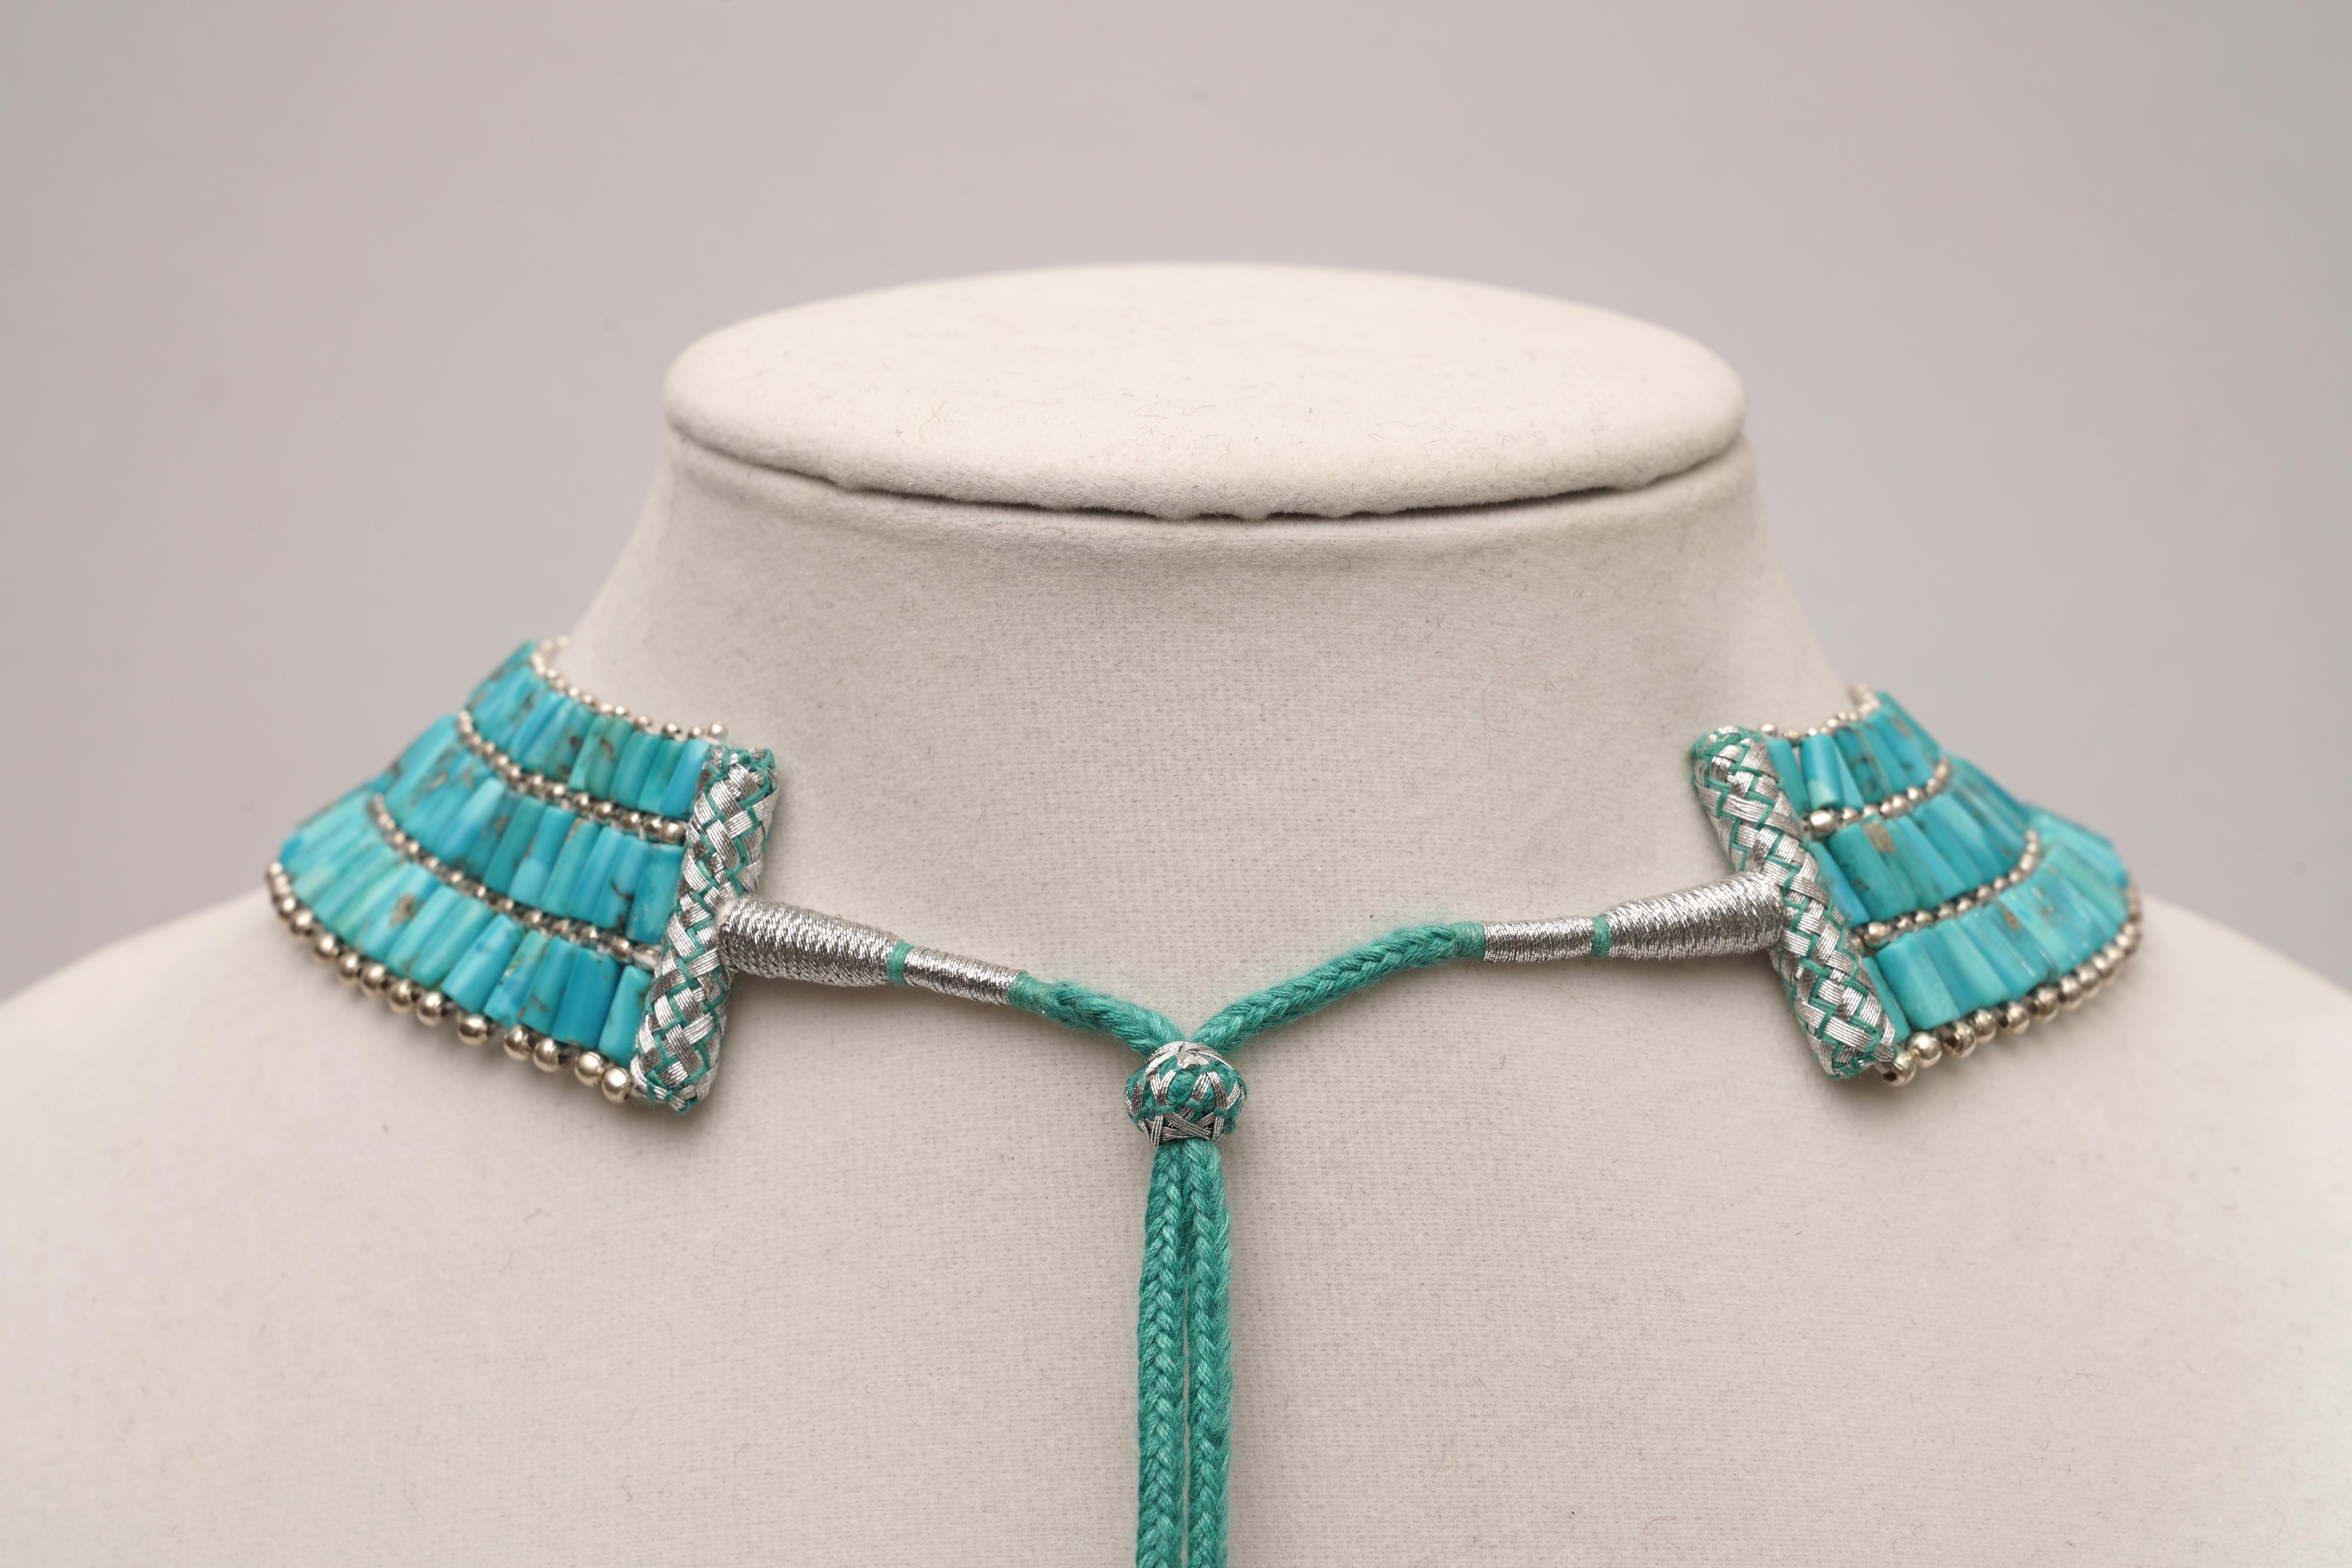 turquoise collar necklace